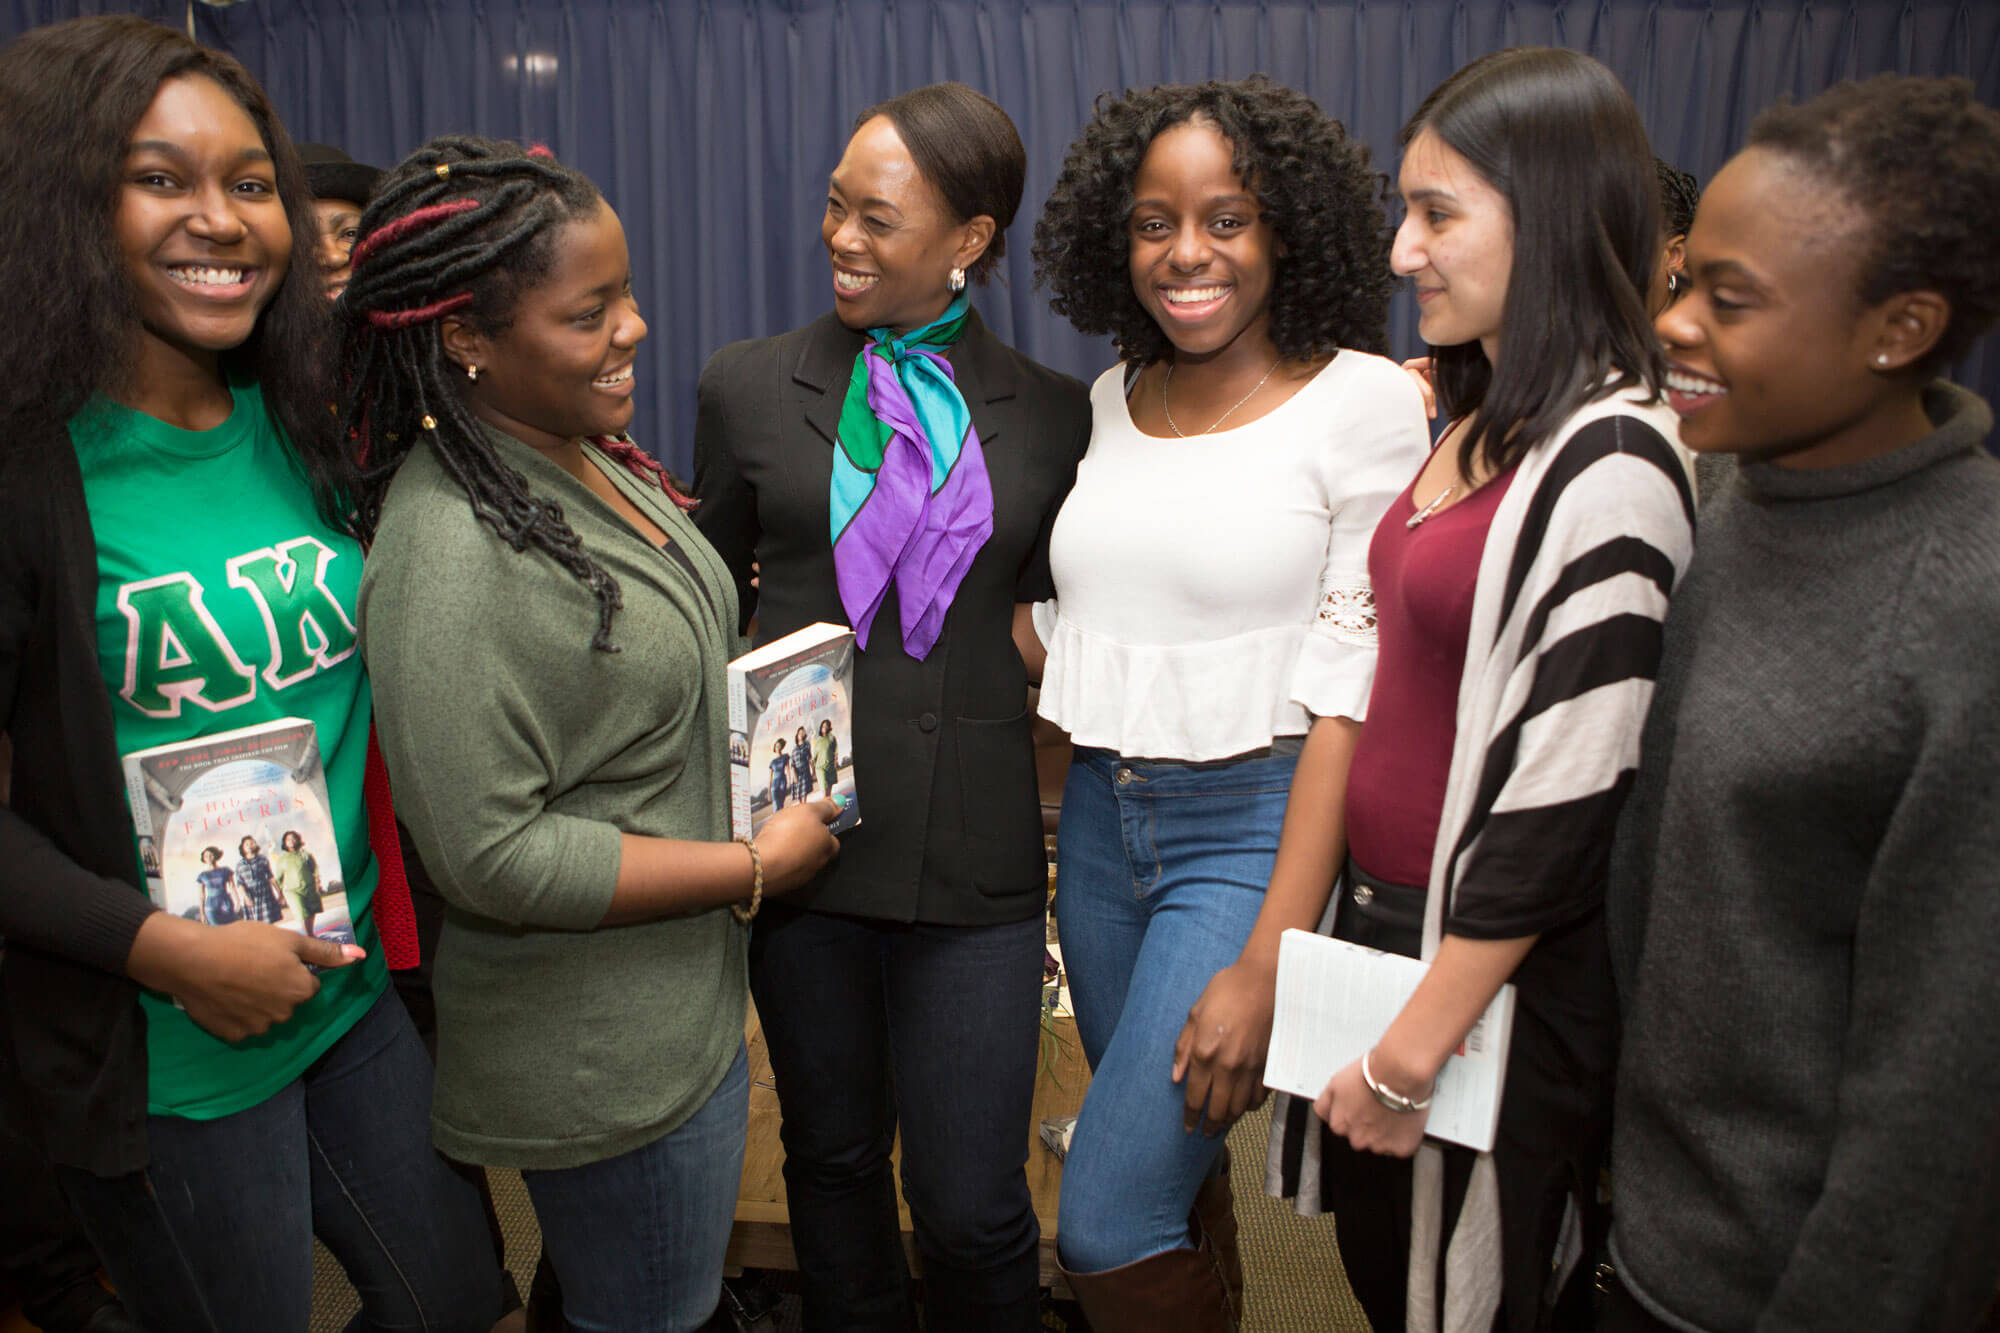 Margot Lee Shetterly smiles for a photo with several Quinnipiac students.